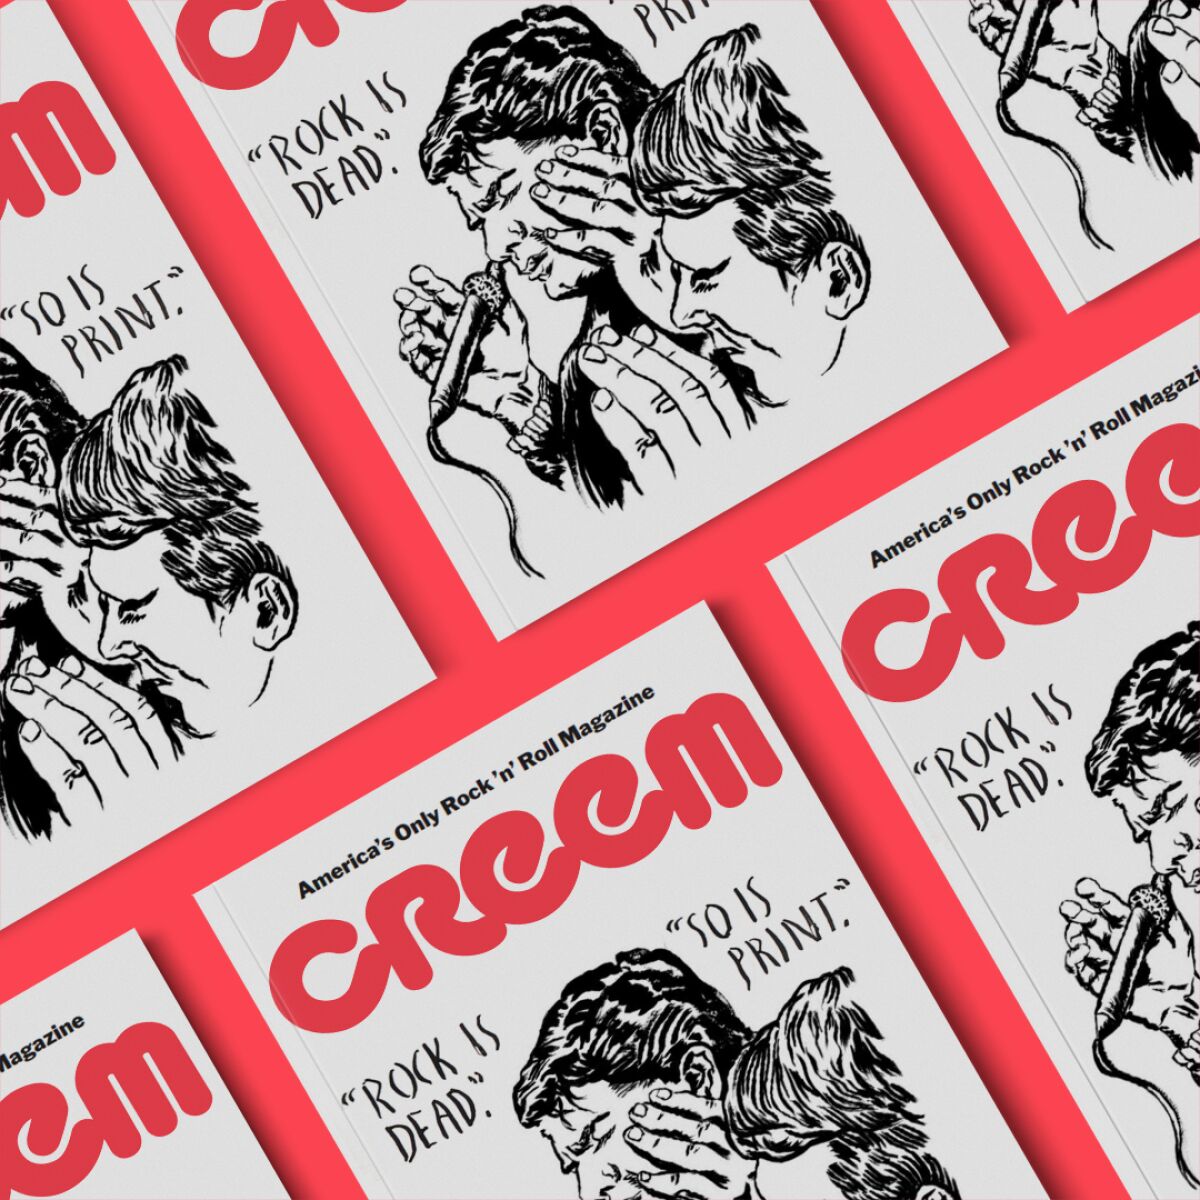 The new Creem's cover, with a drawing of people saying "Rock is dead." "So is print."